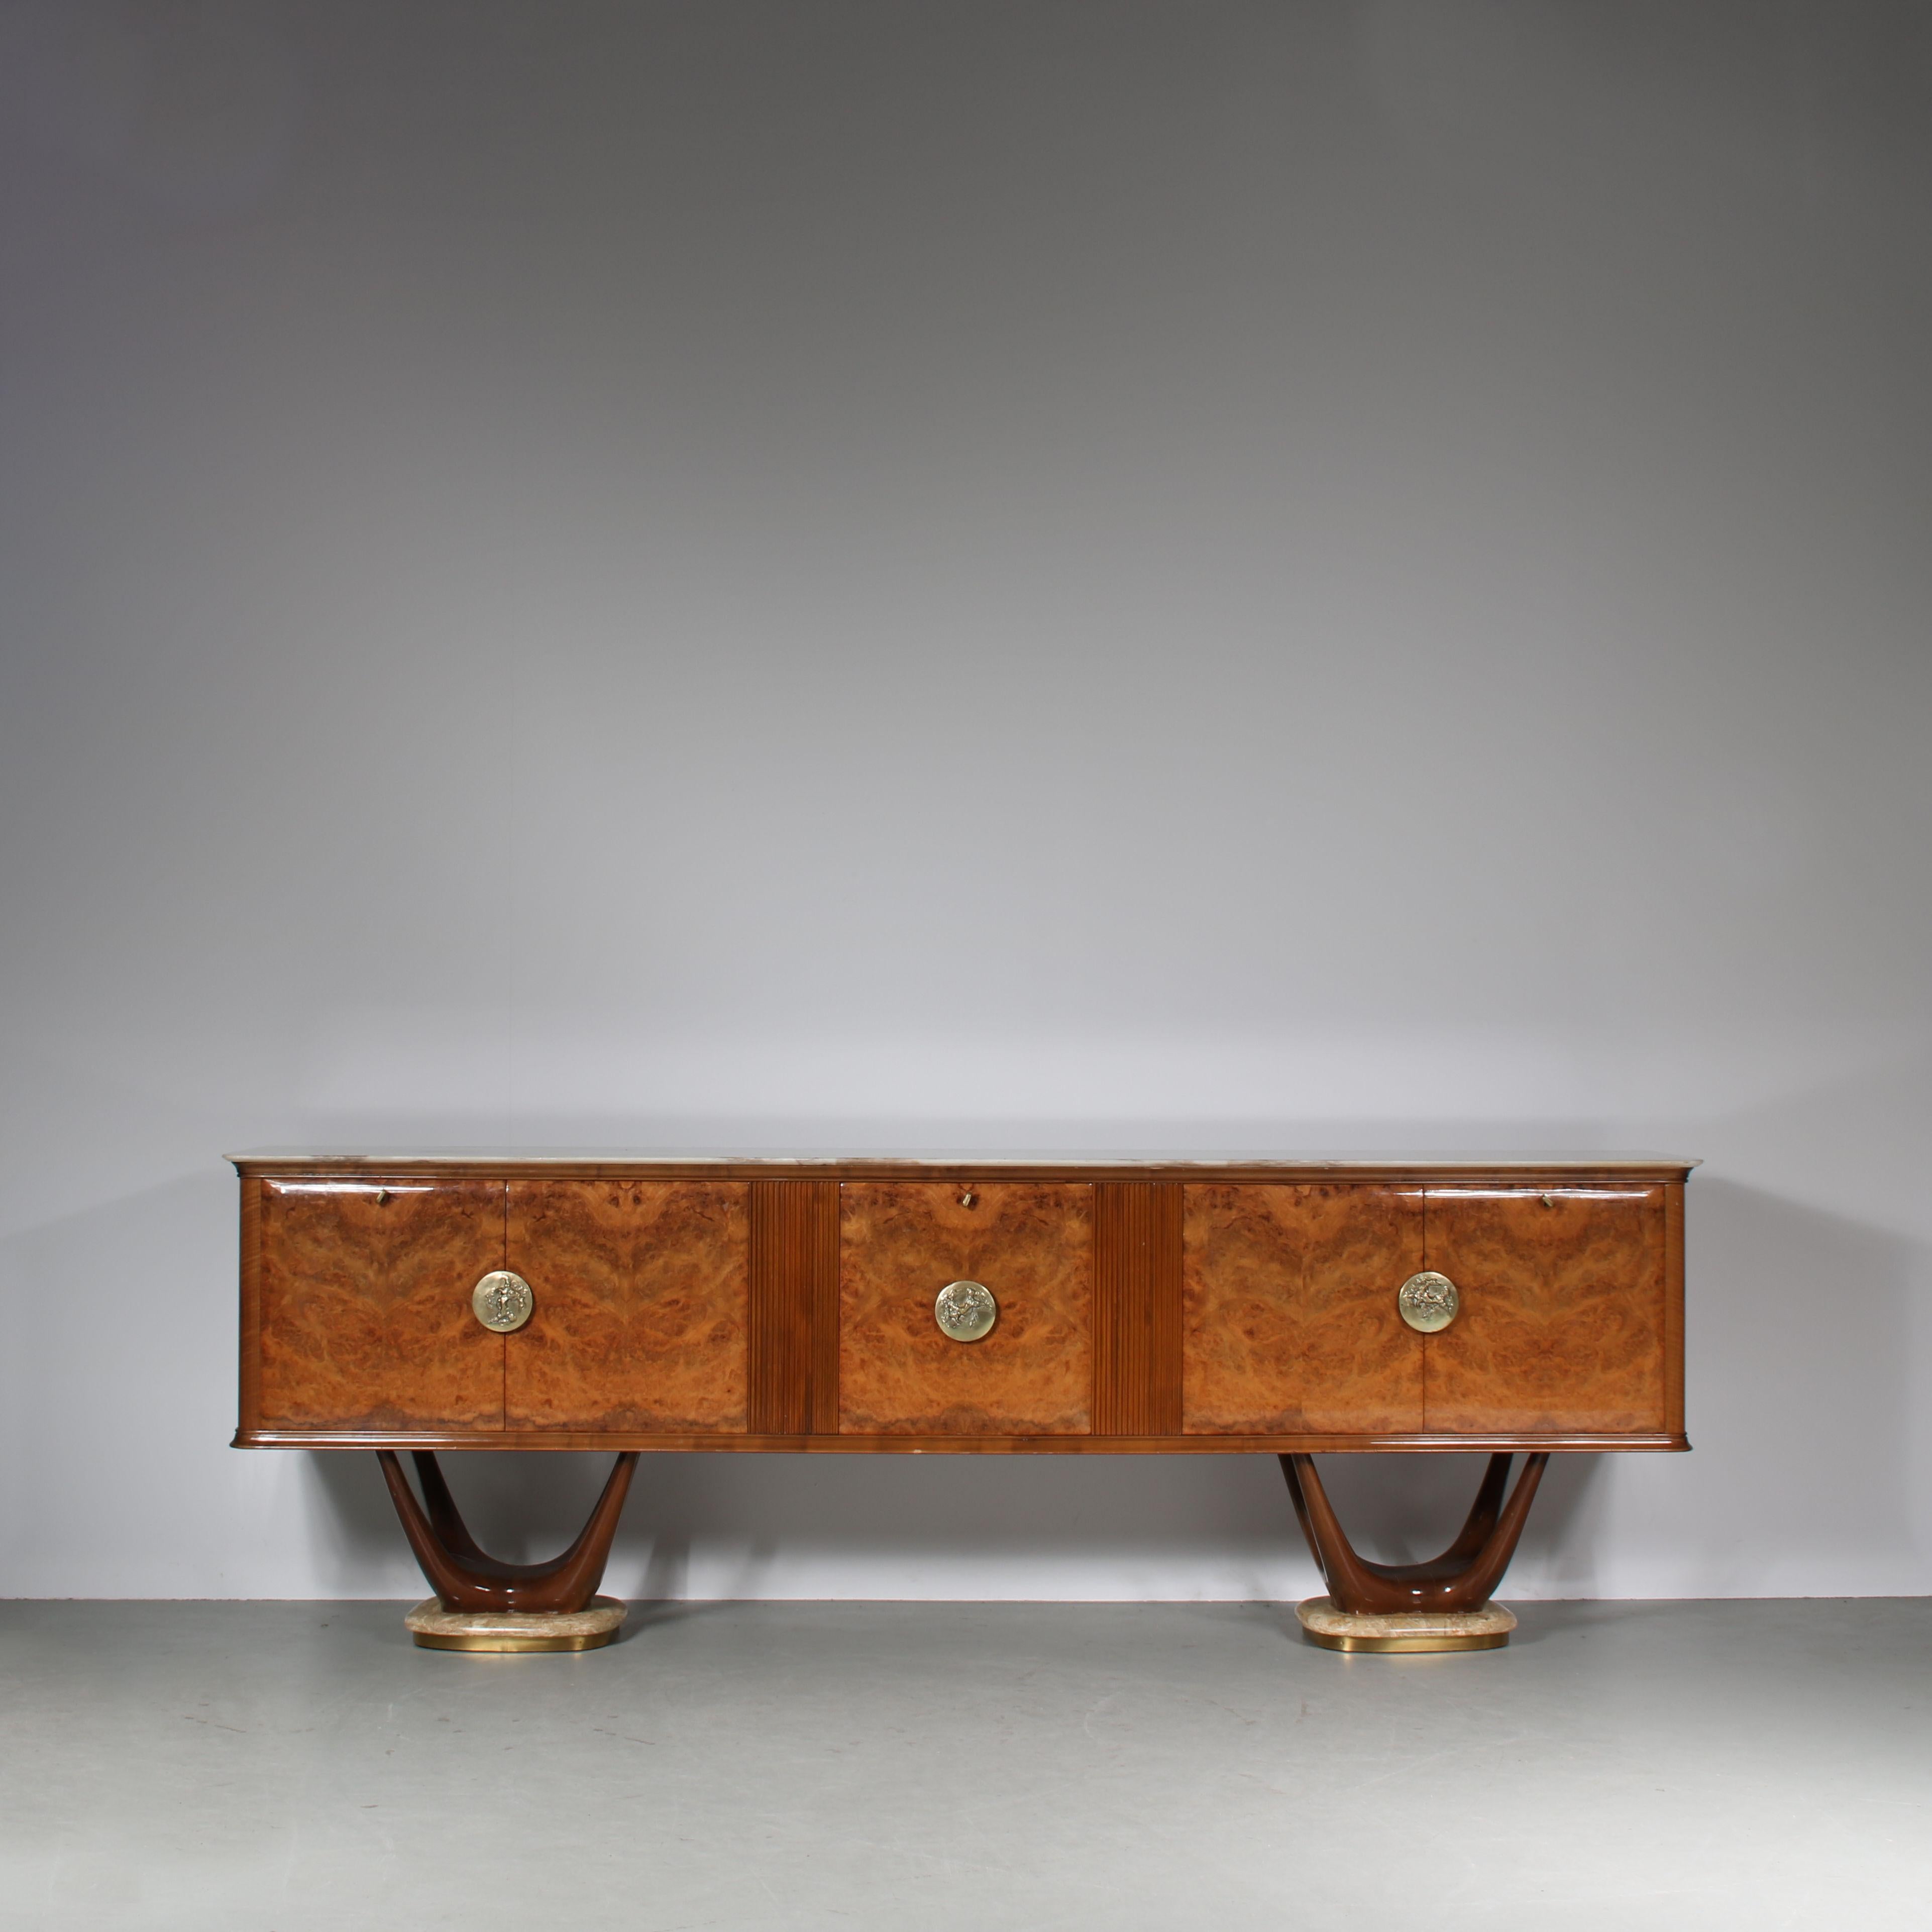 European Large Fratelli Turri Sideboard from Italy, 1950 For Sale